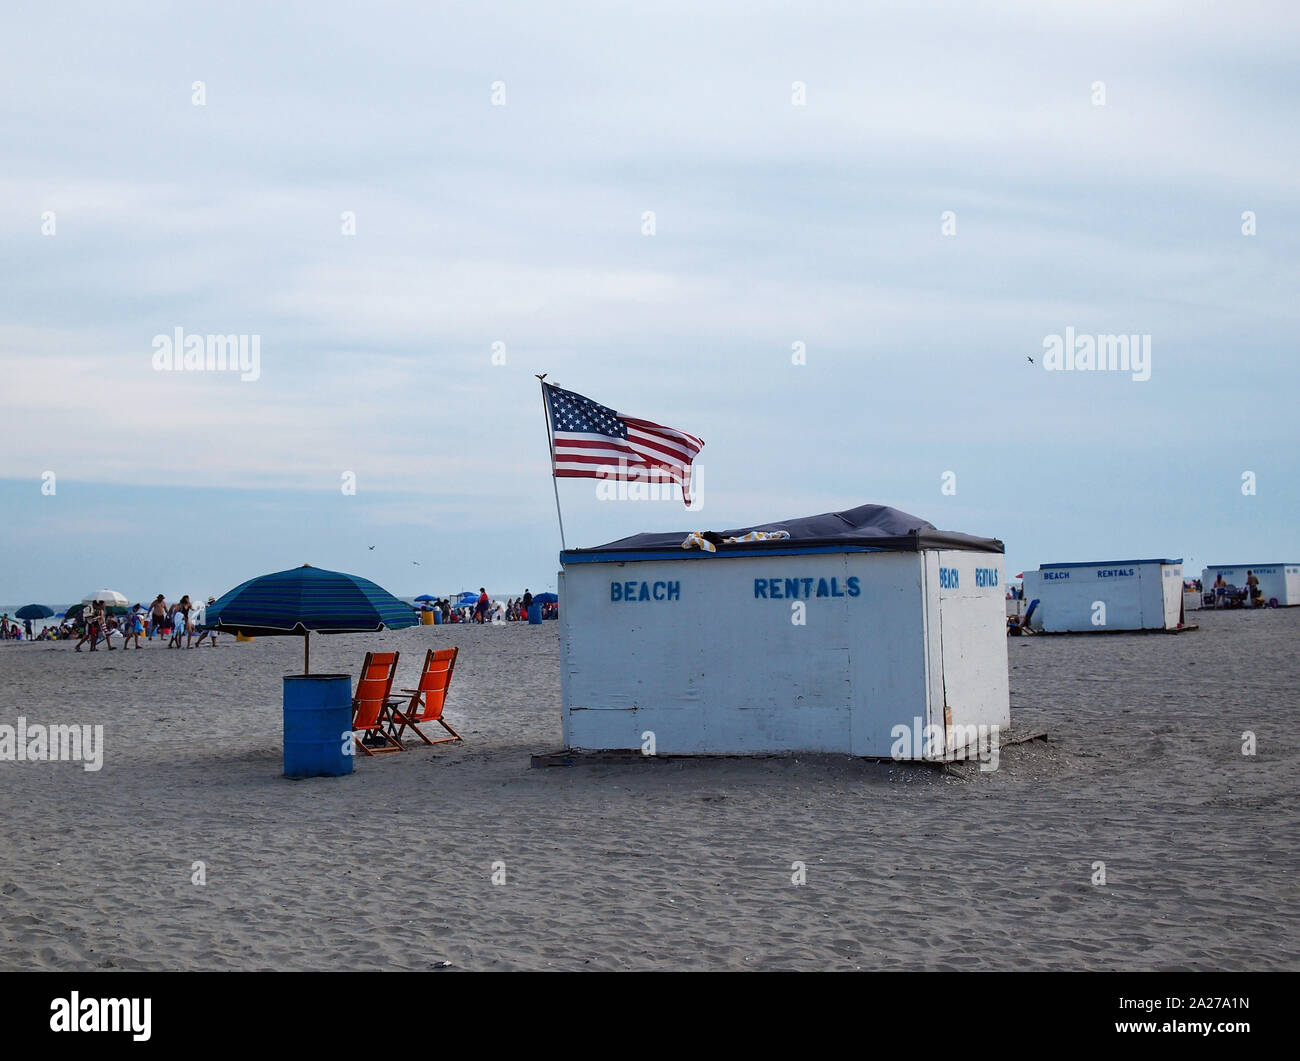 Small wooden shacks spraypainted with stenciiled blue letters reading 'BEACH RENTALS' line an American beach on a busy summer day at the seaside. Stock Photo